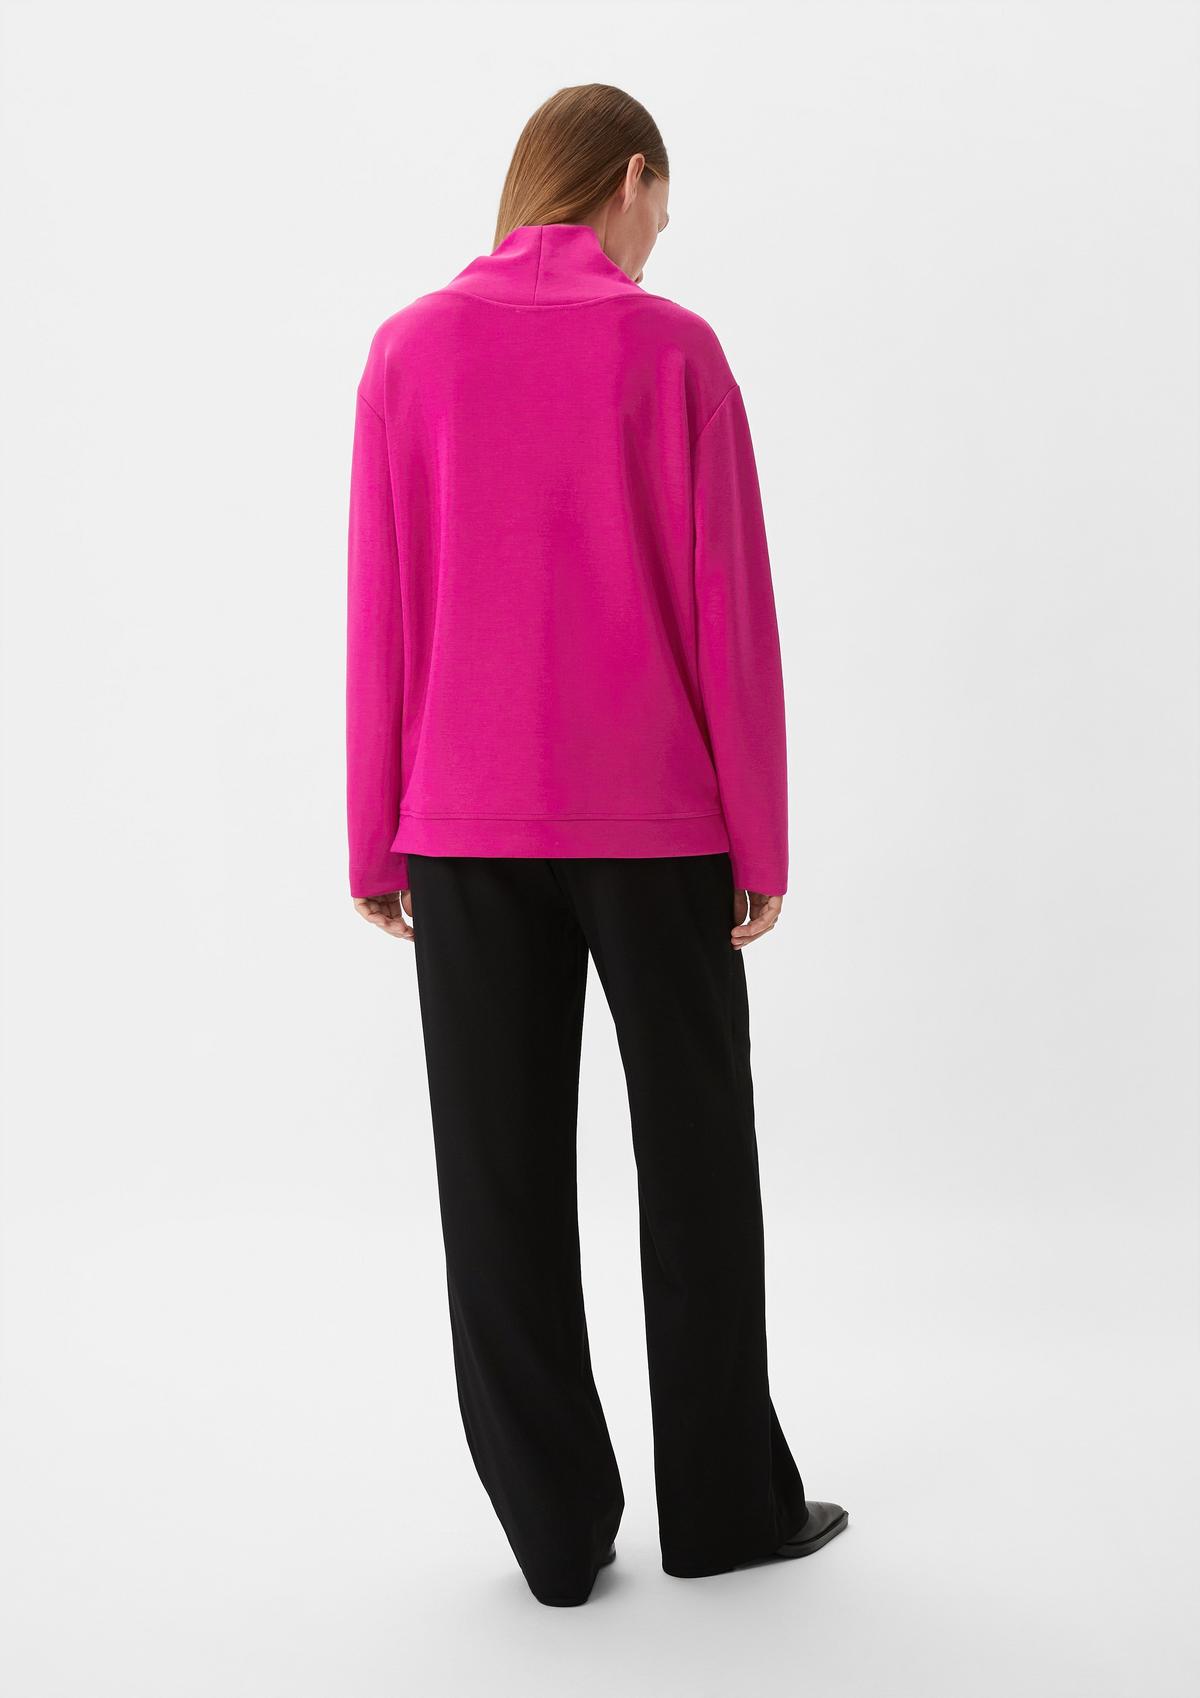 Yaya - Scuba Jogging trousers in a modal blend with zippers